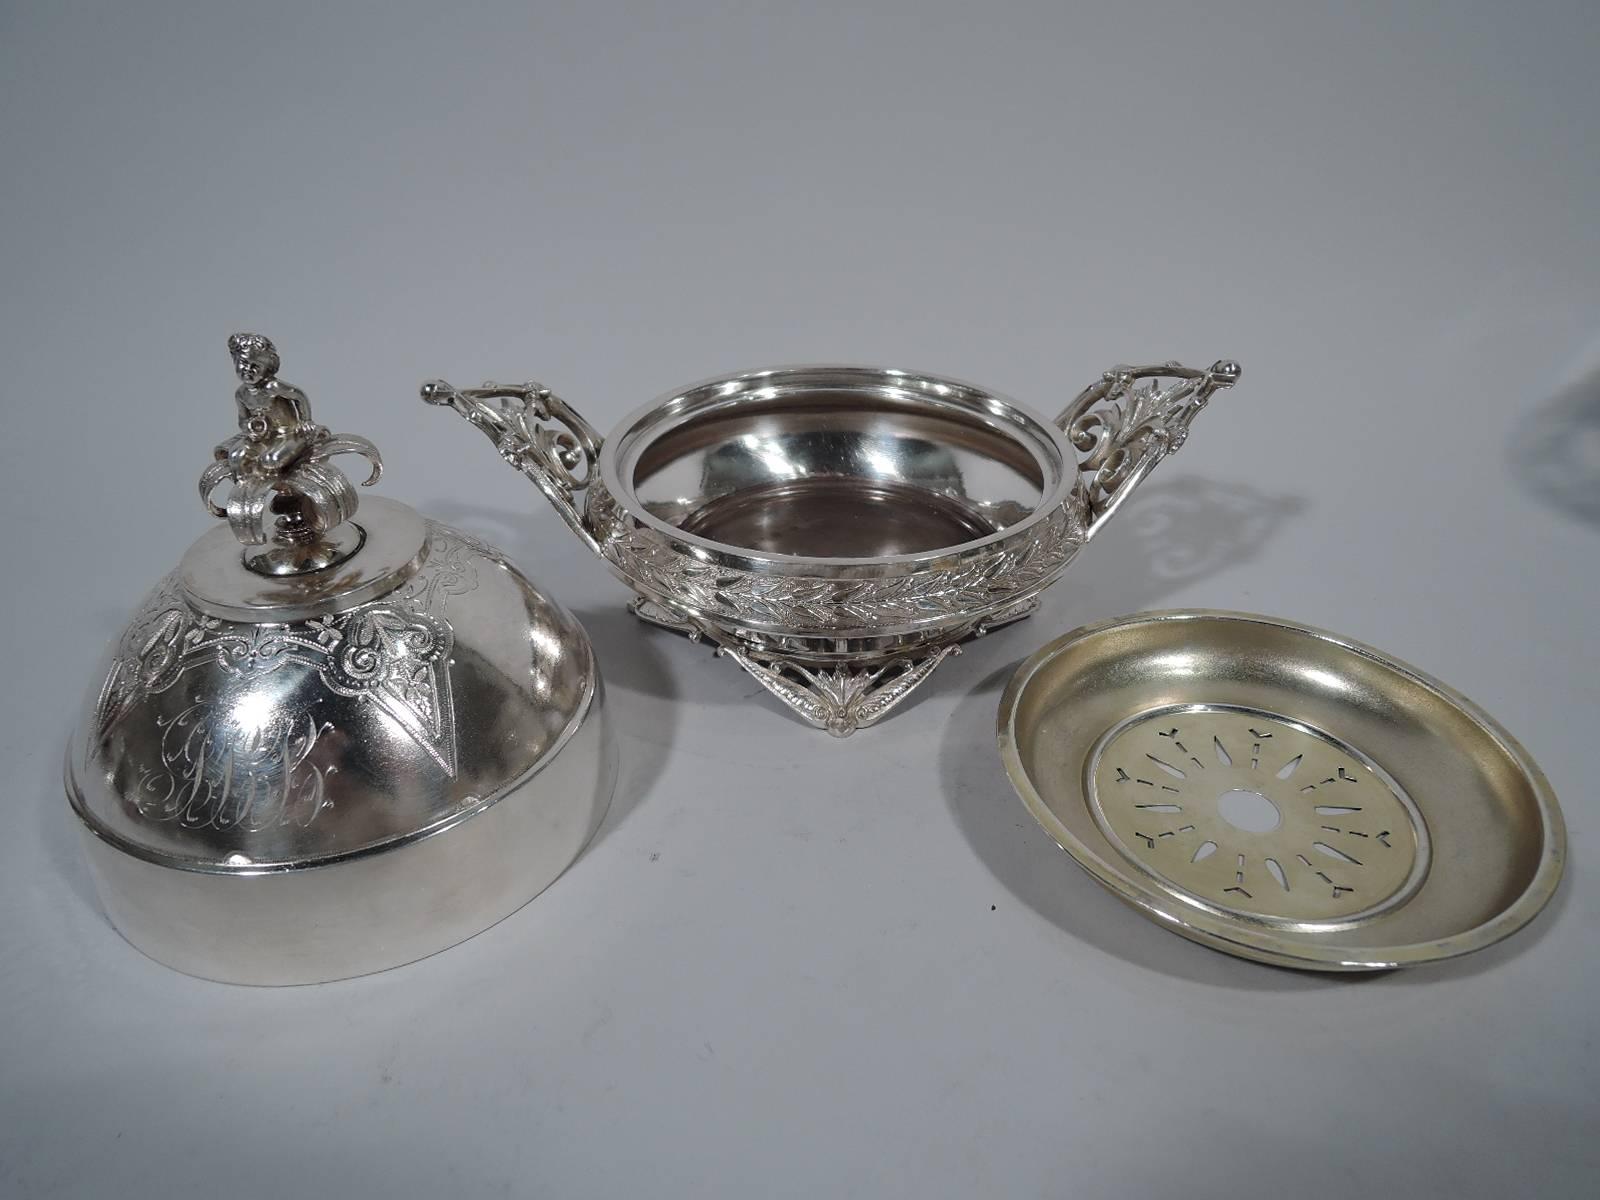 Aesthetic sterling silver butter dish. Made by Wood & Hughes (later Graff, Washbourne & Dunn) in New York, circa 1870. Bowl has tapering sides, turned-down rim, and four open triangular supports and two trefoil side handles inset with leaves. Domed